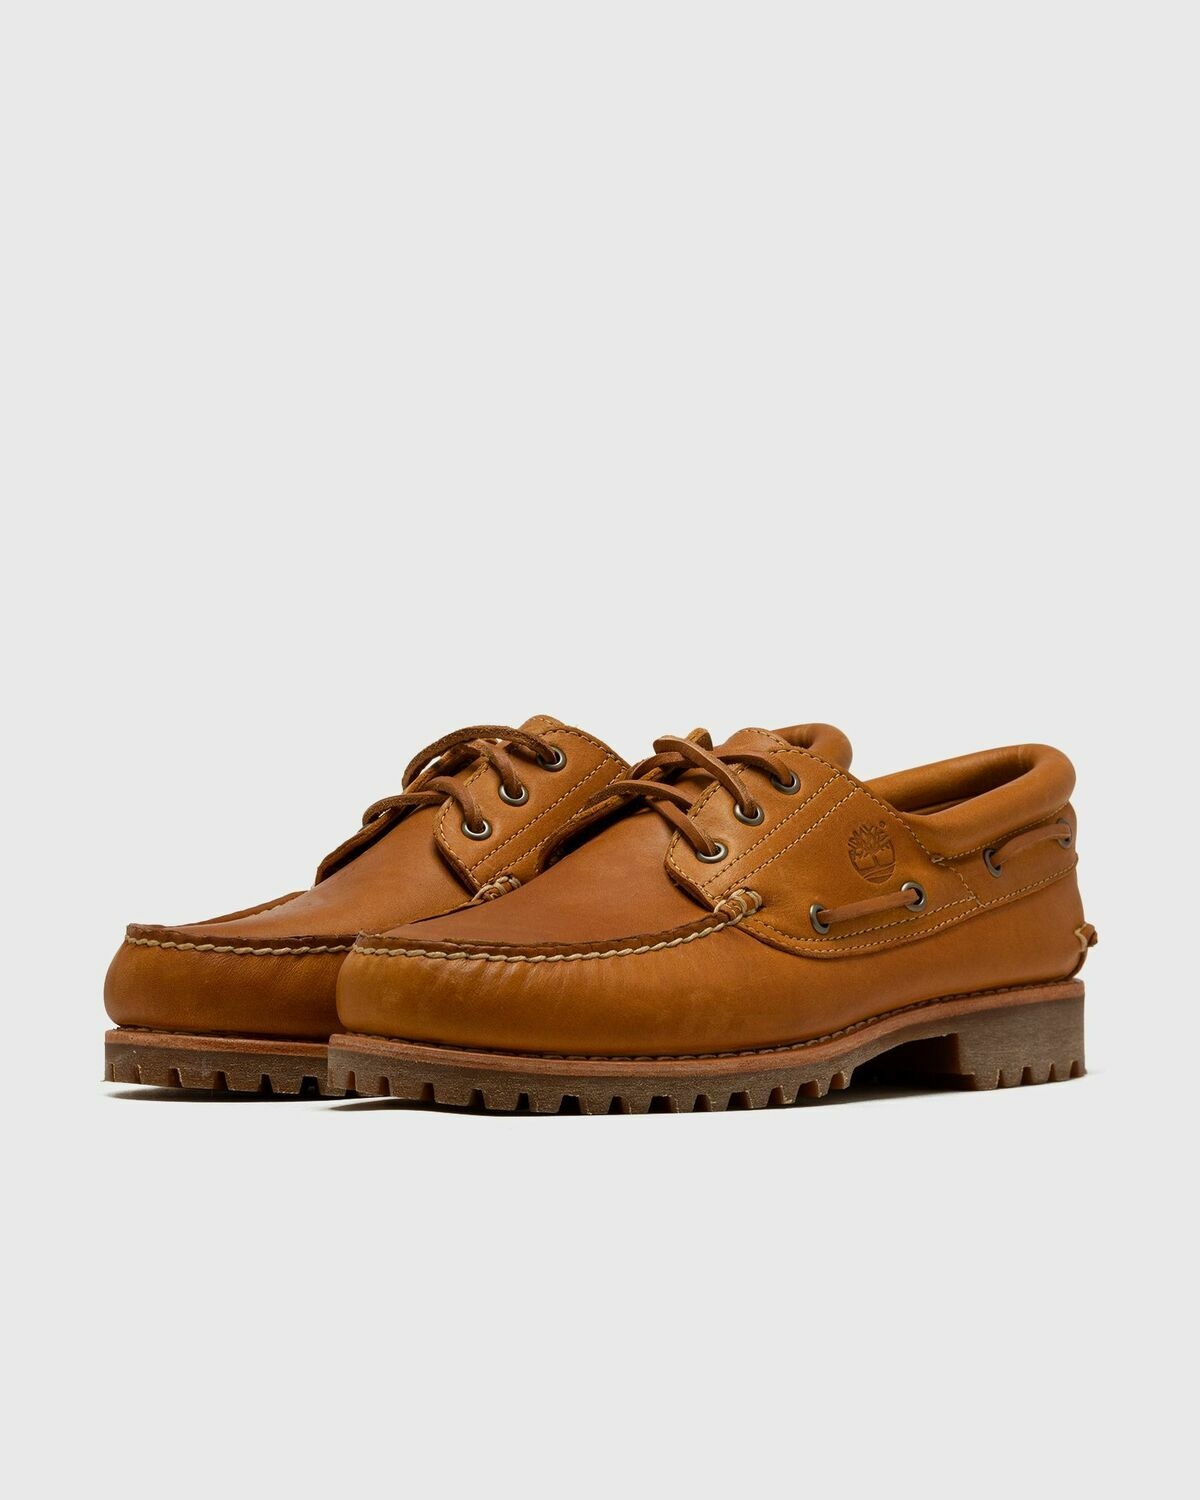 Timberland Authentics 3 Eye Classic Lug Wheat Brown - Mens - Boots